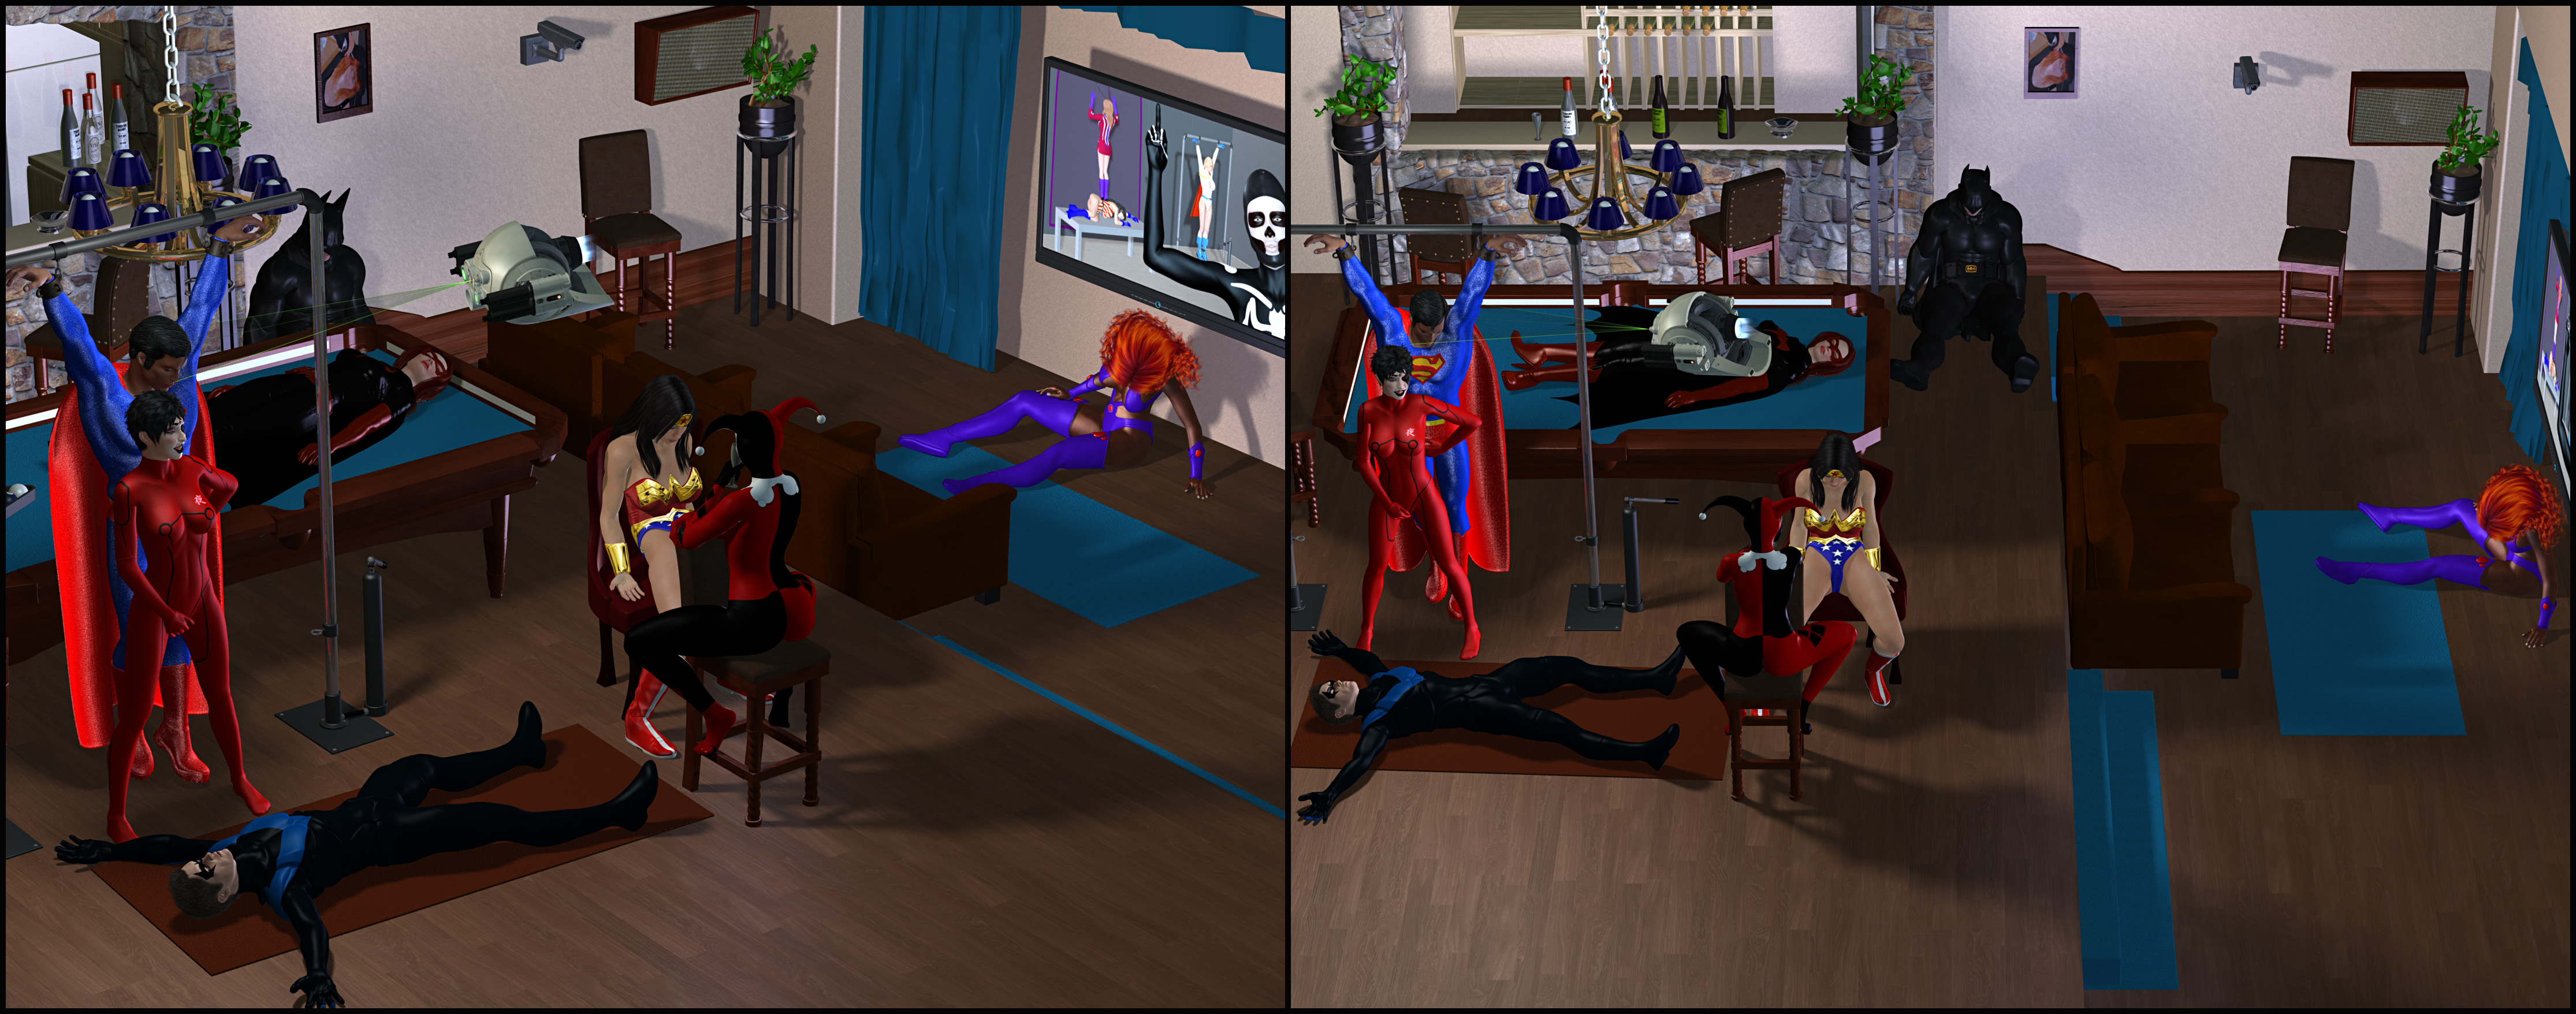 Harley's Slumber Party, 2 View Collage